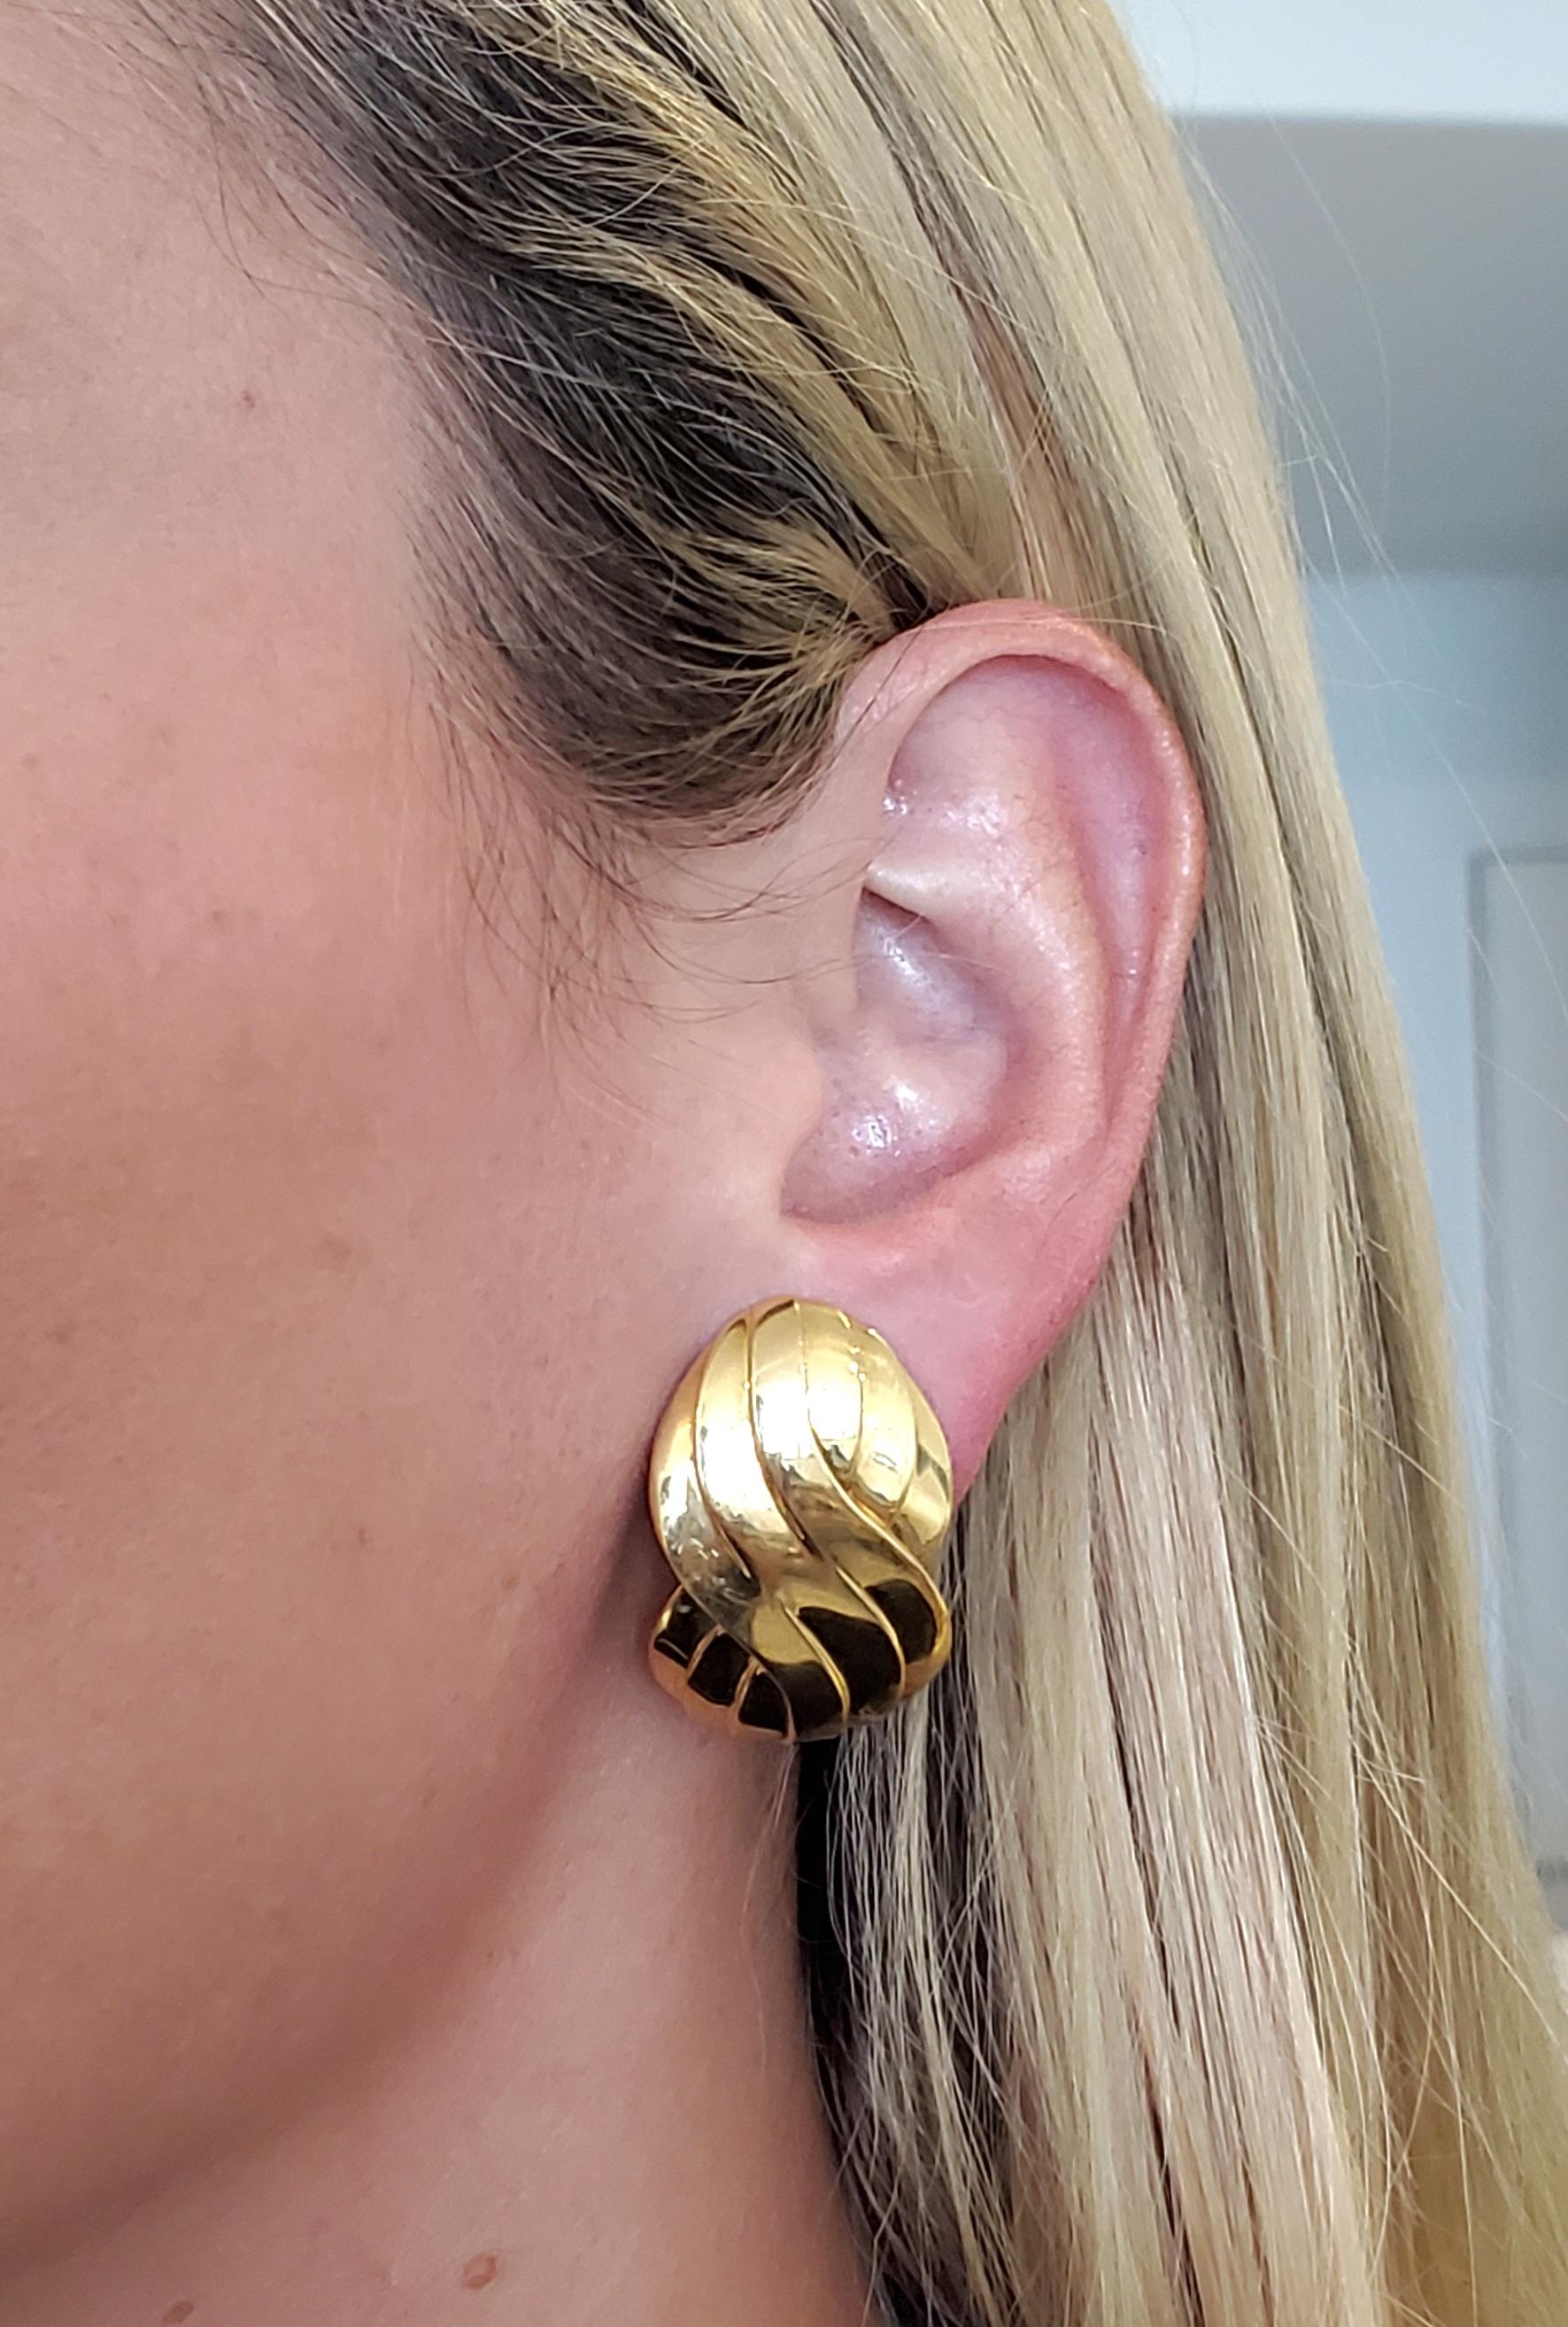 Knots earrings designed by Michael Bondanza.

Very elegant bold pair of earrings, created at the jewelry atelier of Michael Bondanza. These substantial clips-on, has been crafted with simples stylized knots patterns in solid yellow gold of 18 karats